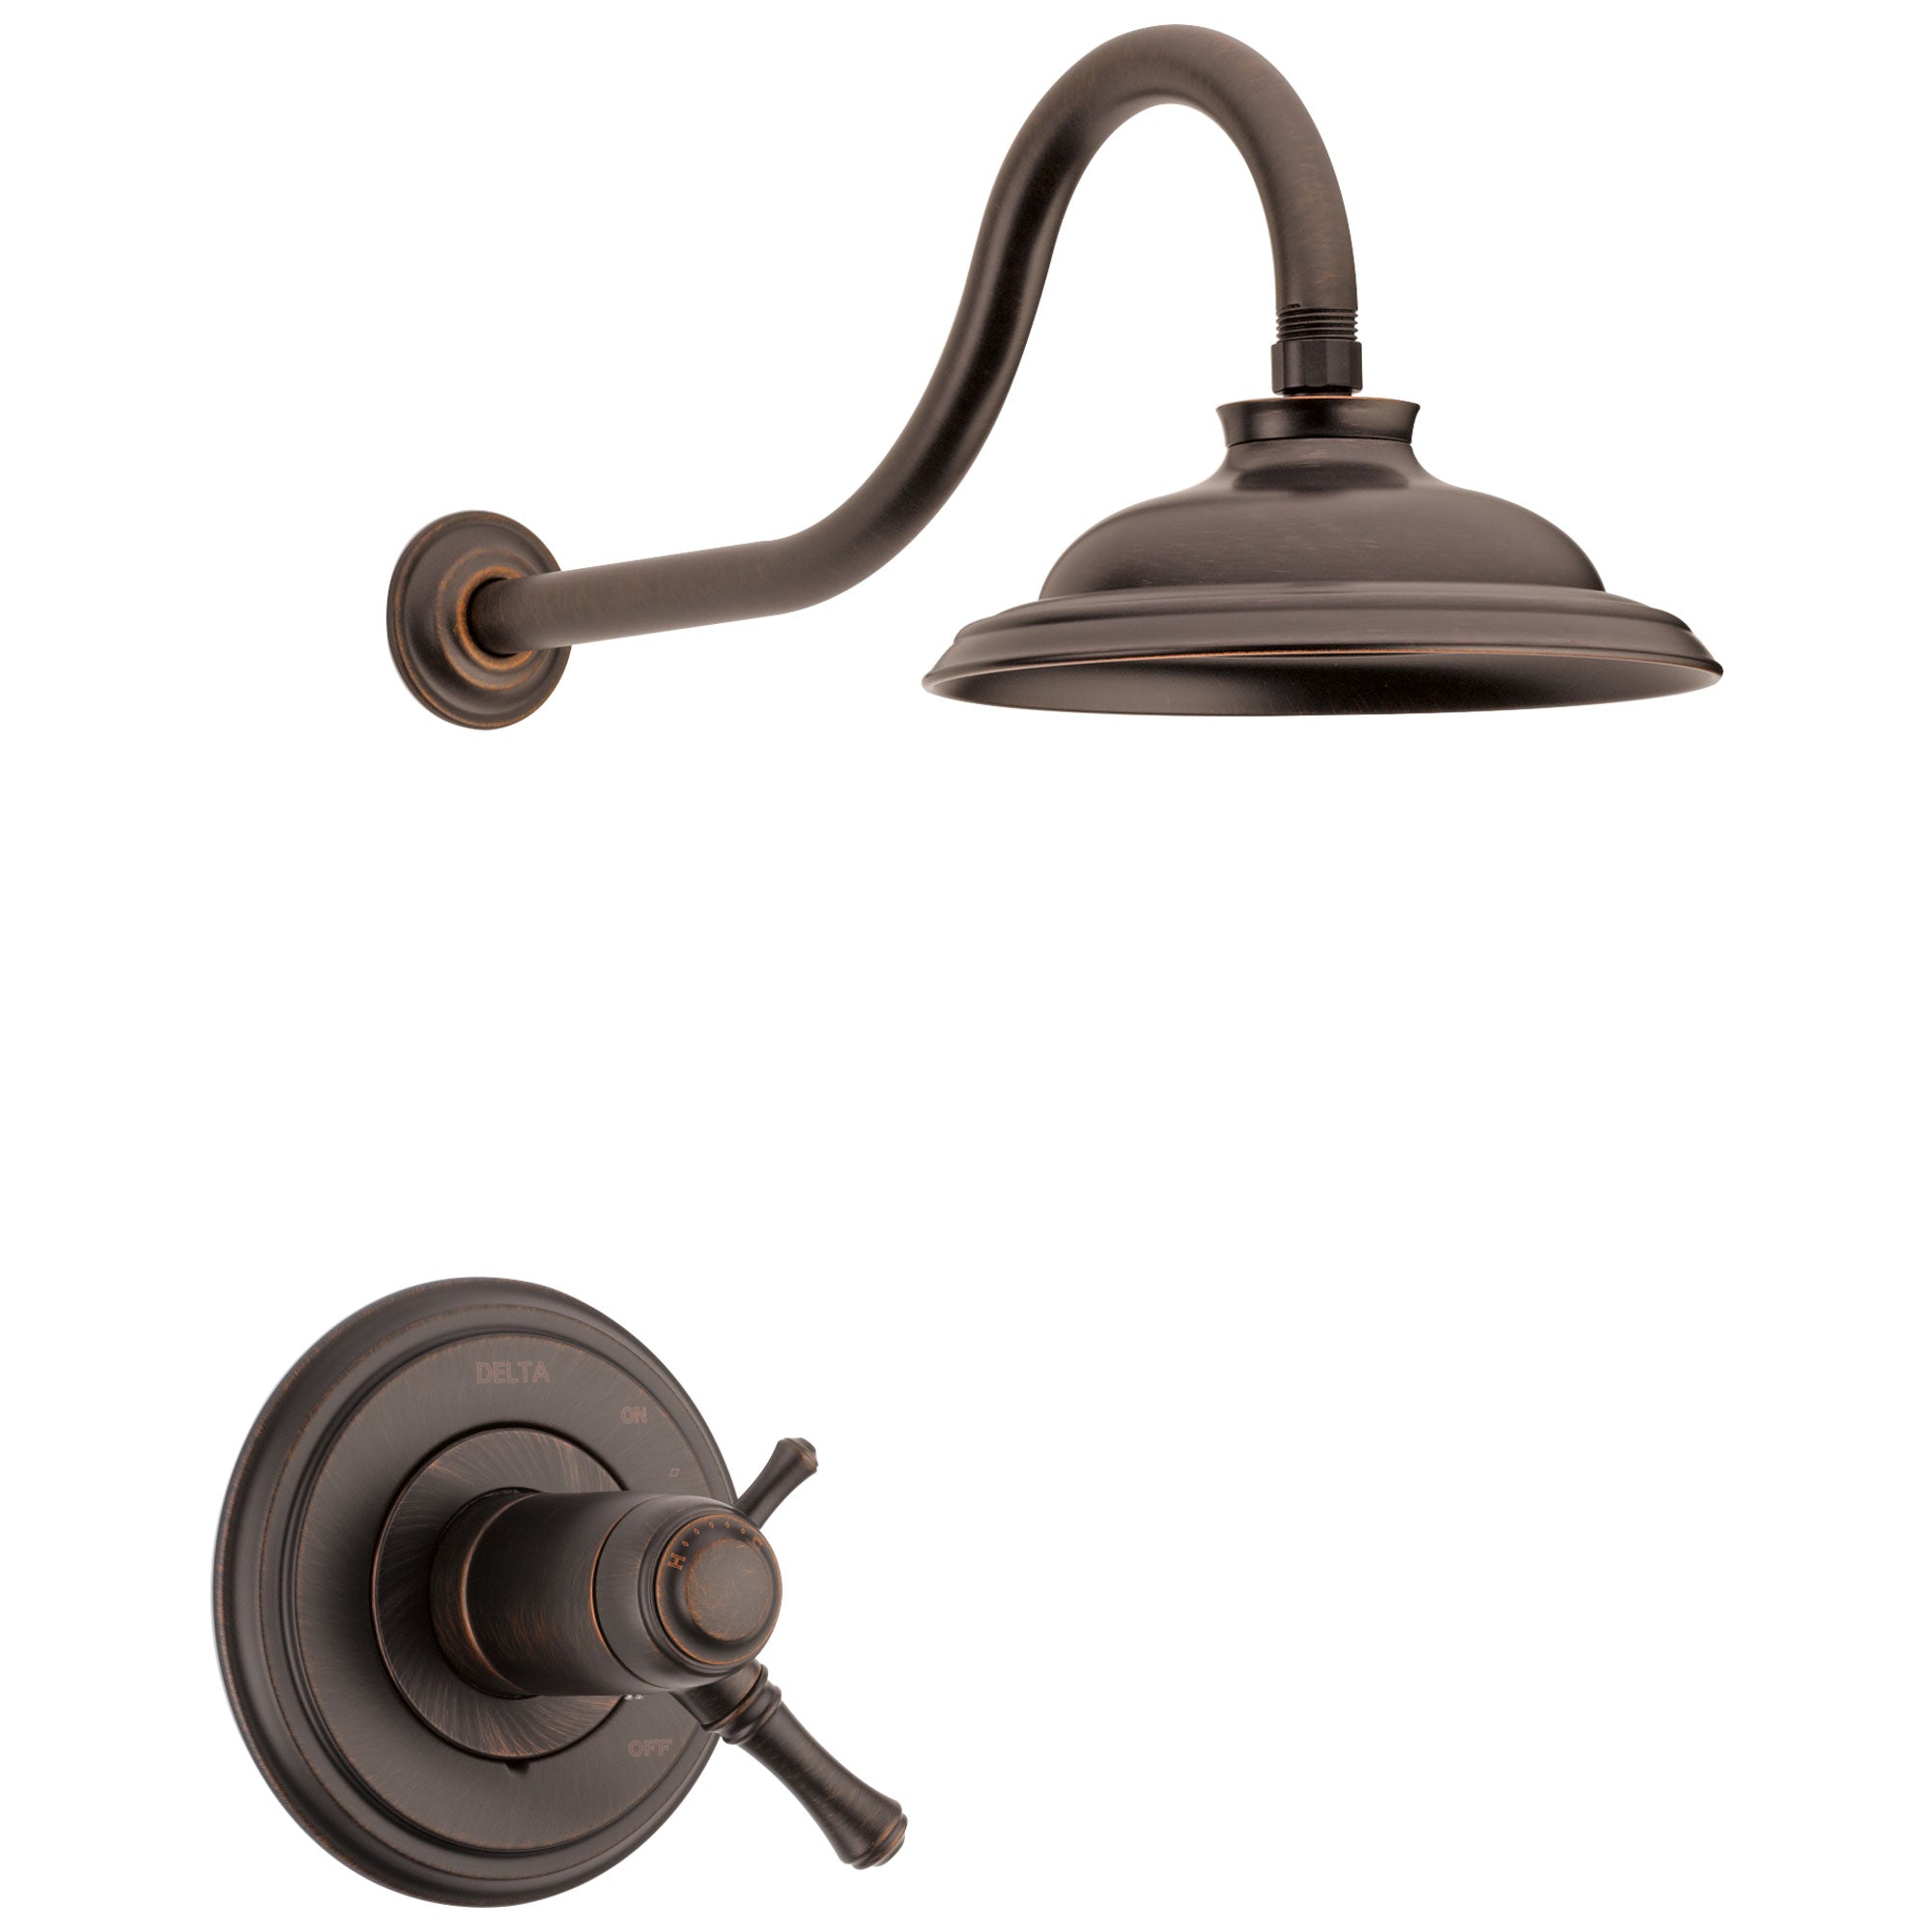 Delta Cassidy Venetian Bronze Finish TempAssure Water Efficient Shower only Faucet Includes 17T Cartridge, Handles, and Valve without Stops D3271V